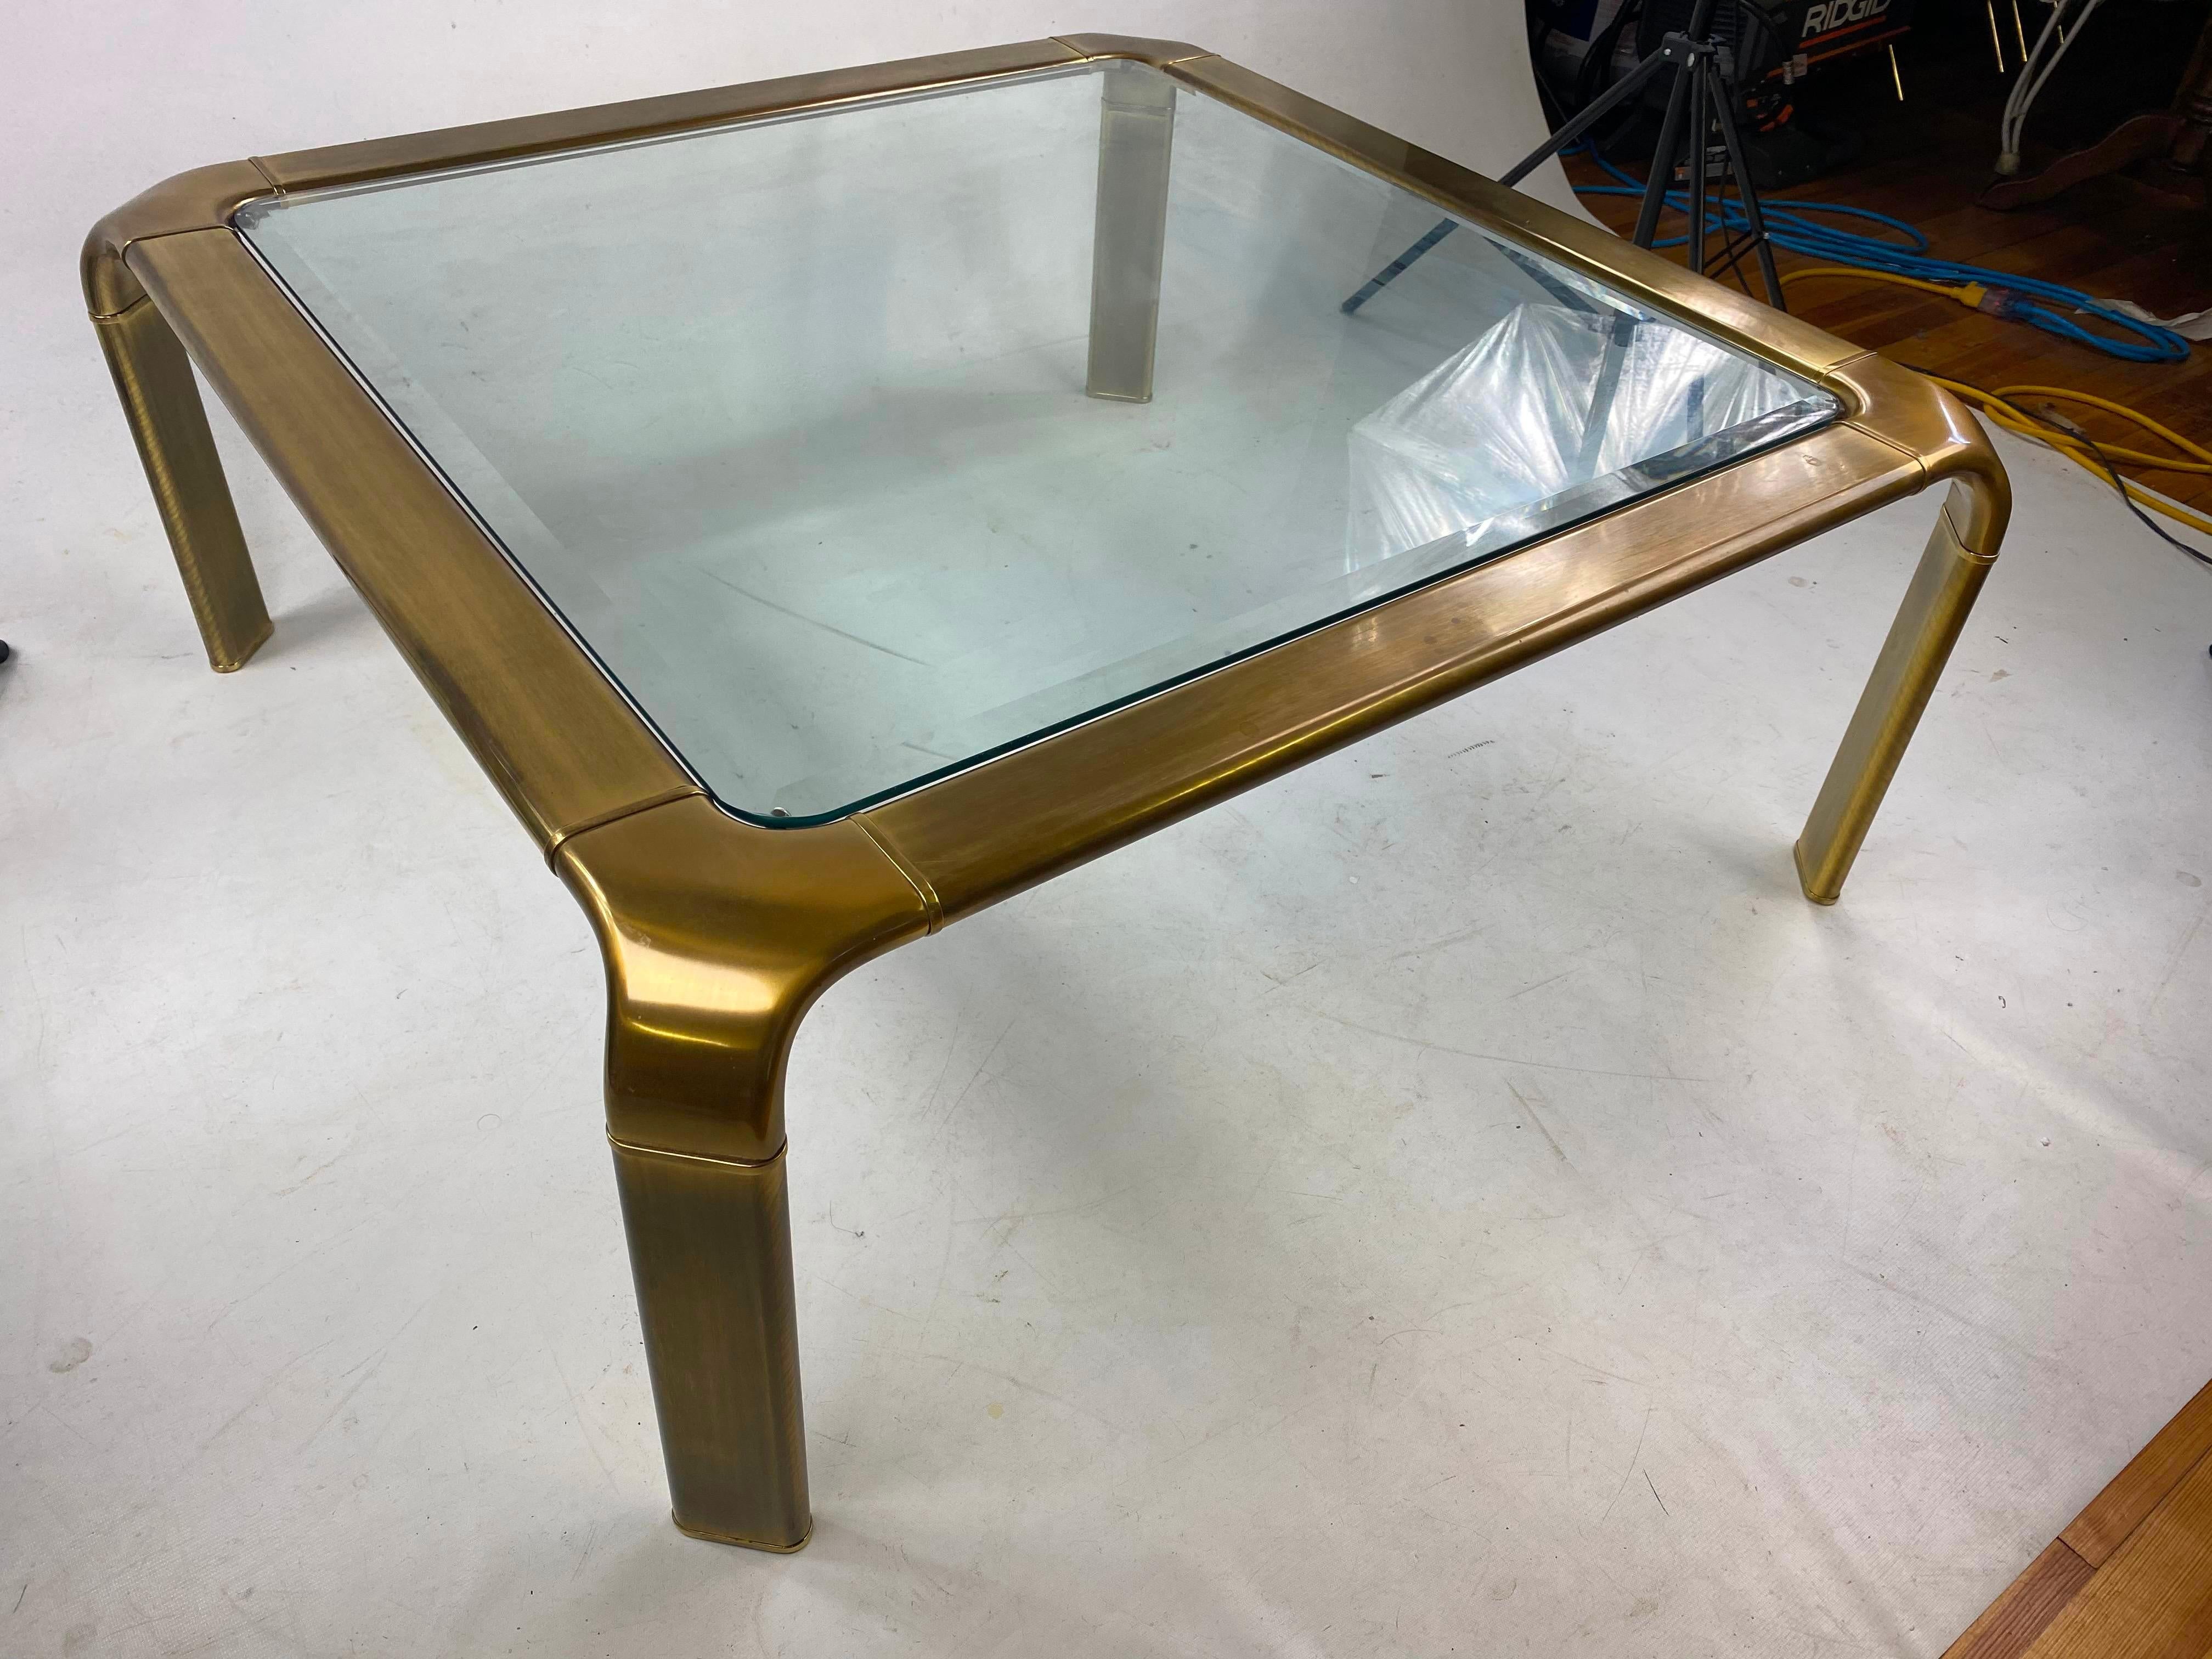 Great brass coffee table. The table looks absolutely amazing and has nice beveled glass.
 